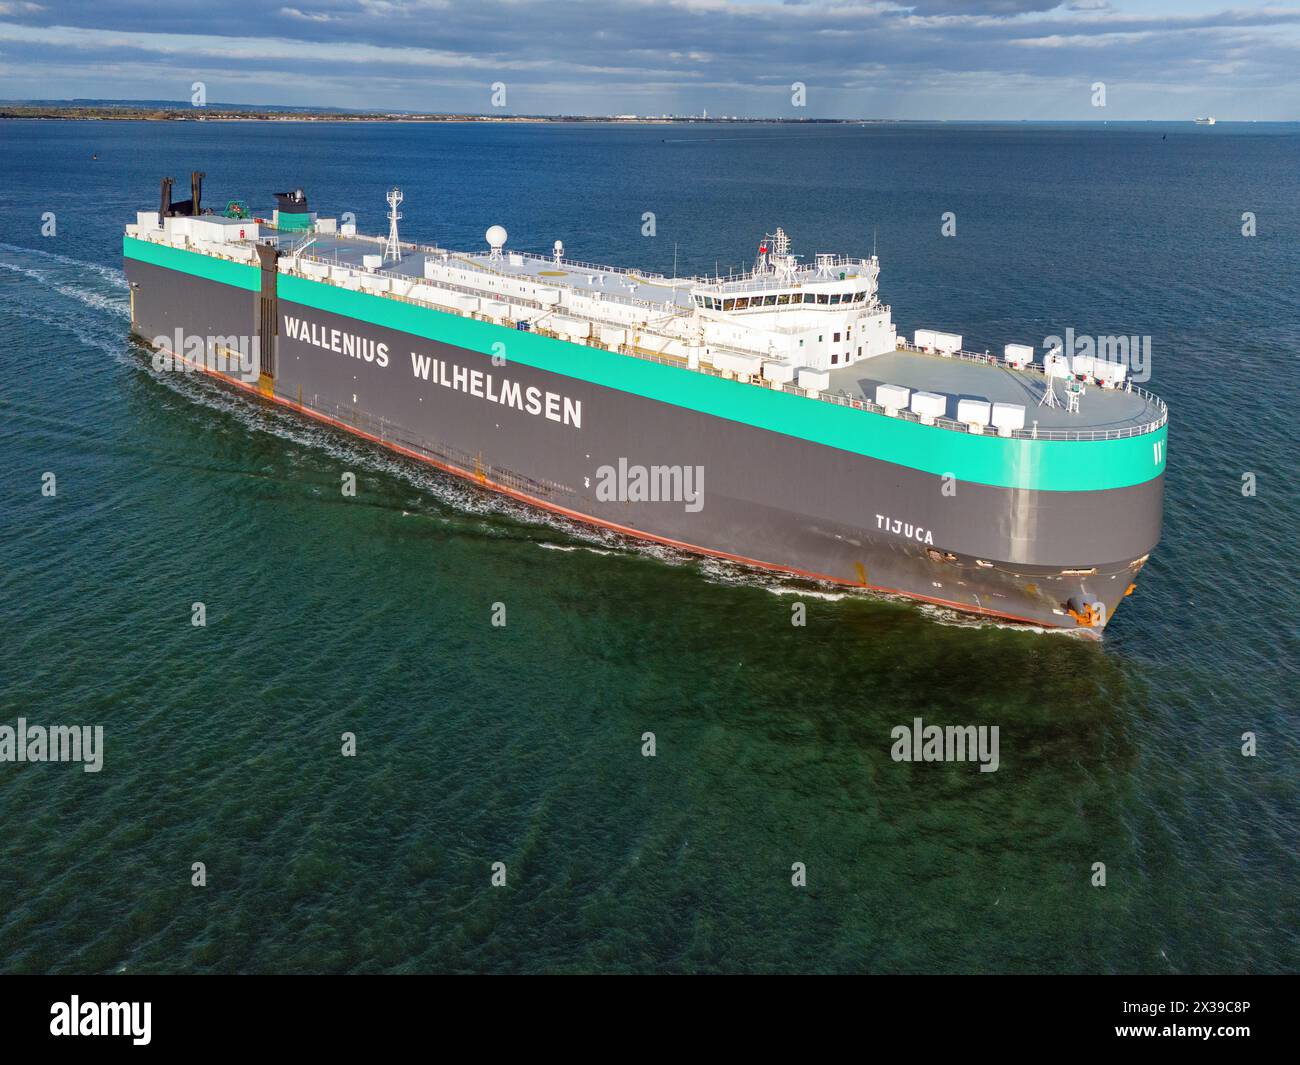 Tijuca is a Ro-Ro Large Car and Truck Carrier operated by Wallenius Wilhelmsen. Stock Photo